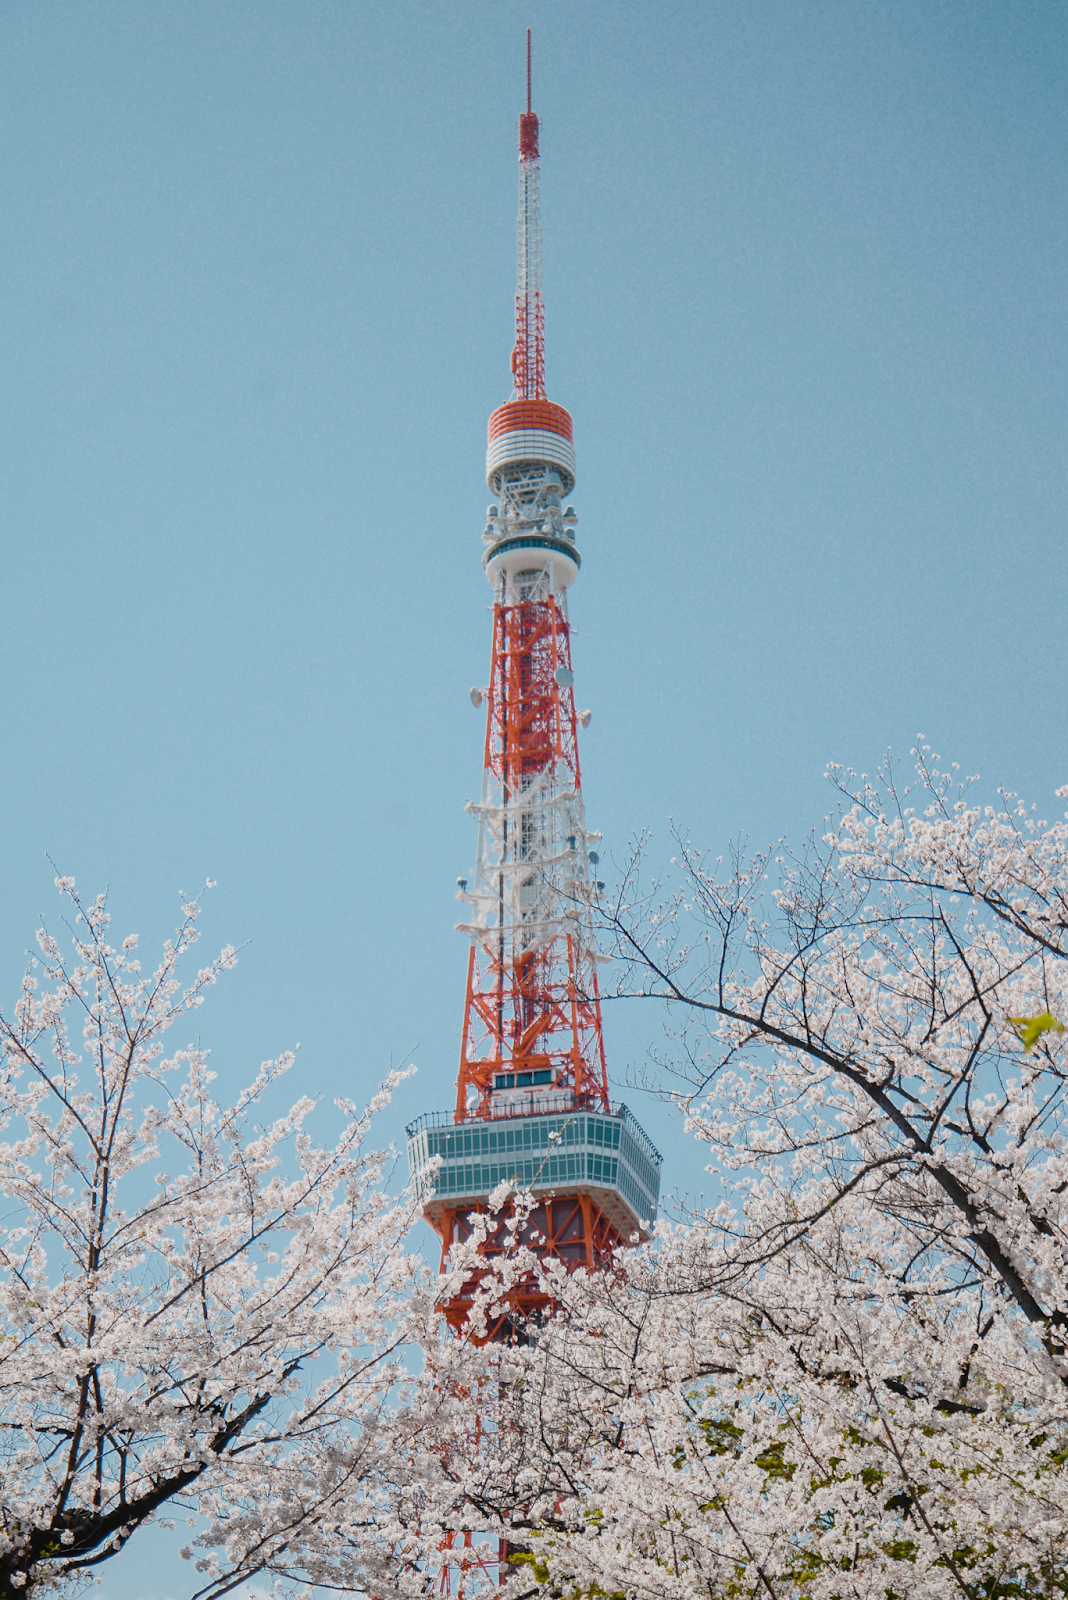 Tokyo Tower and cherry blossom, Tokyo's Not So Secret Cherry Blossoms Spots That You Might Not Know Of - Style and Travel Blogger Van Le (FOREVERVANNY.com)